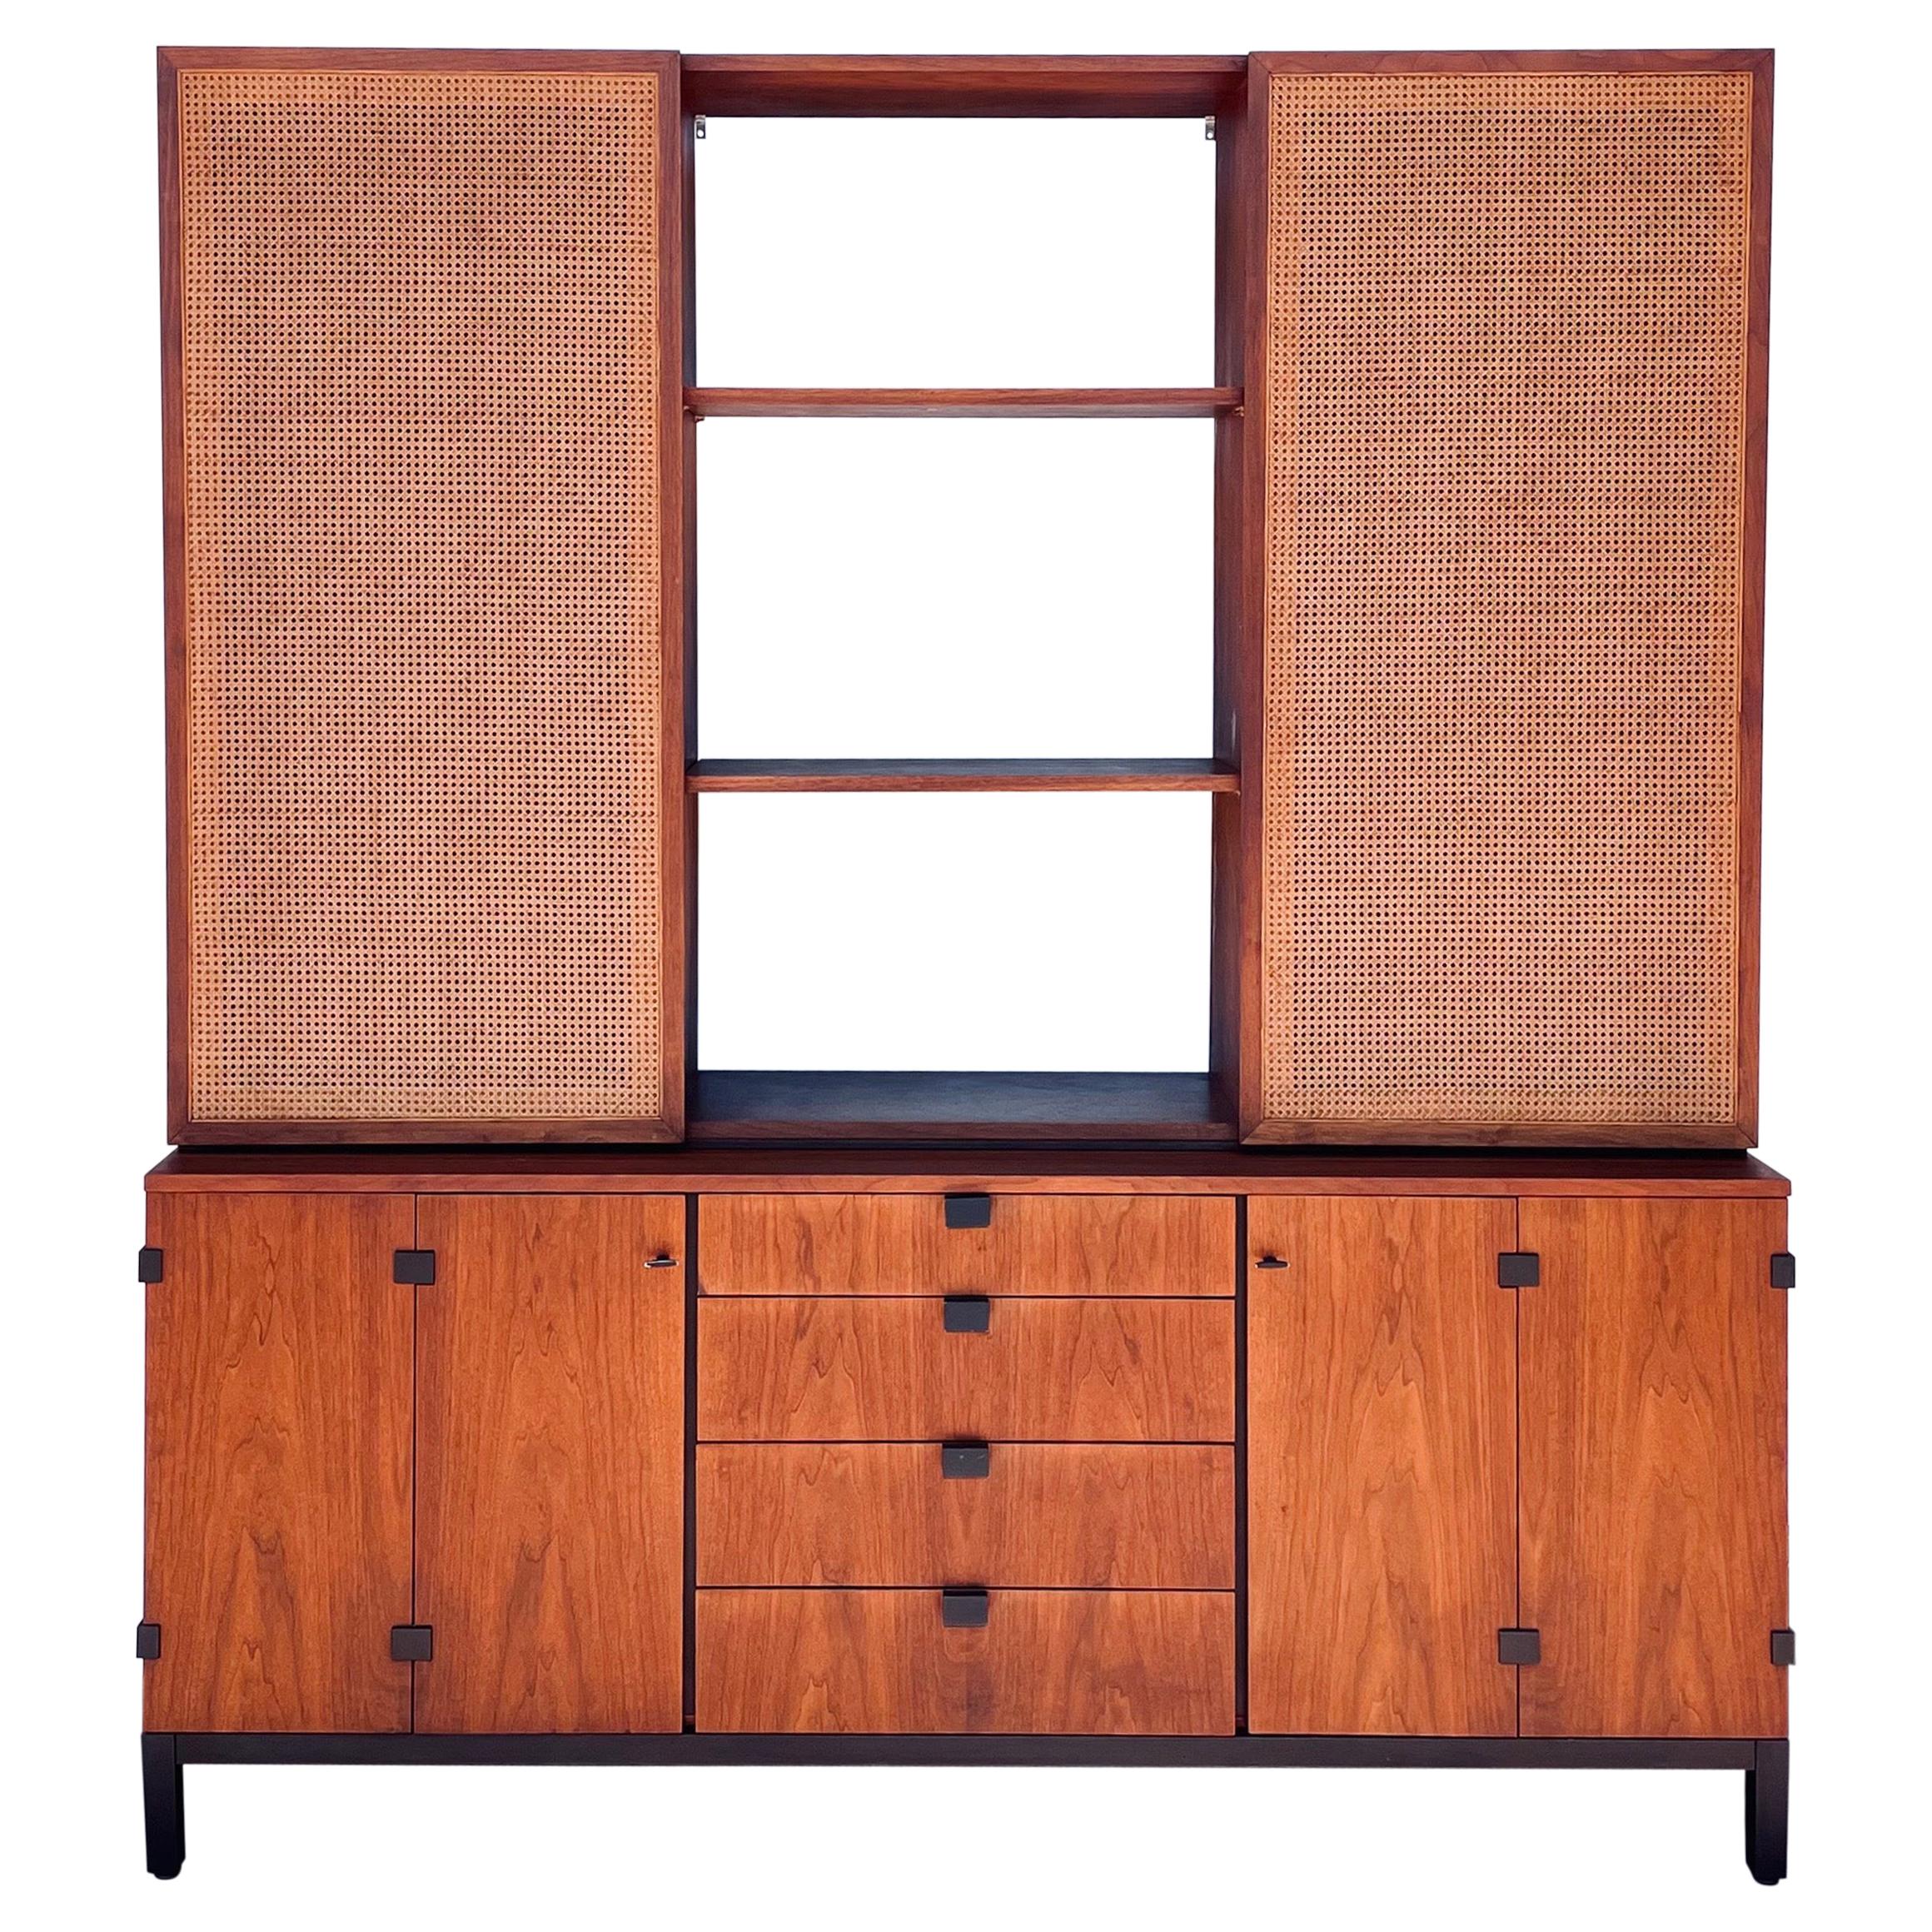 Mid-Century Modern Walnut Sideboard Credenza by Milo Baughman for Directional